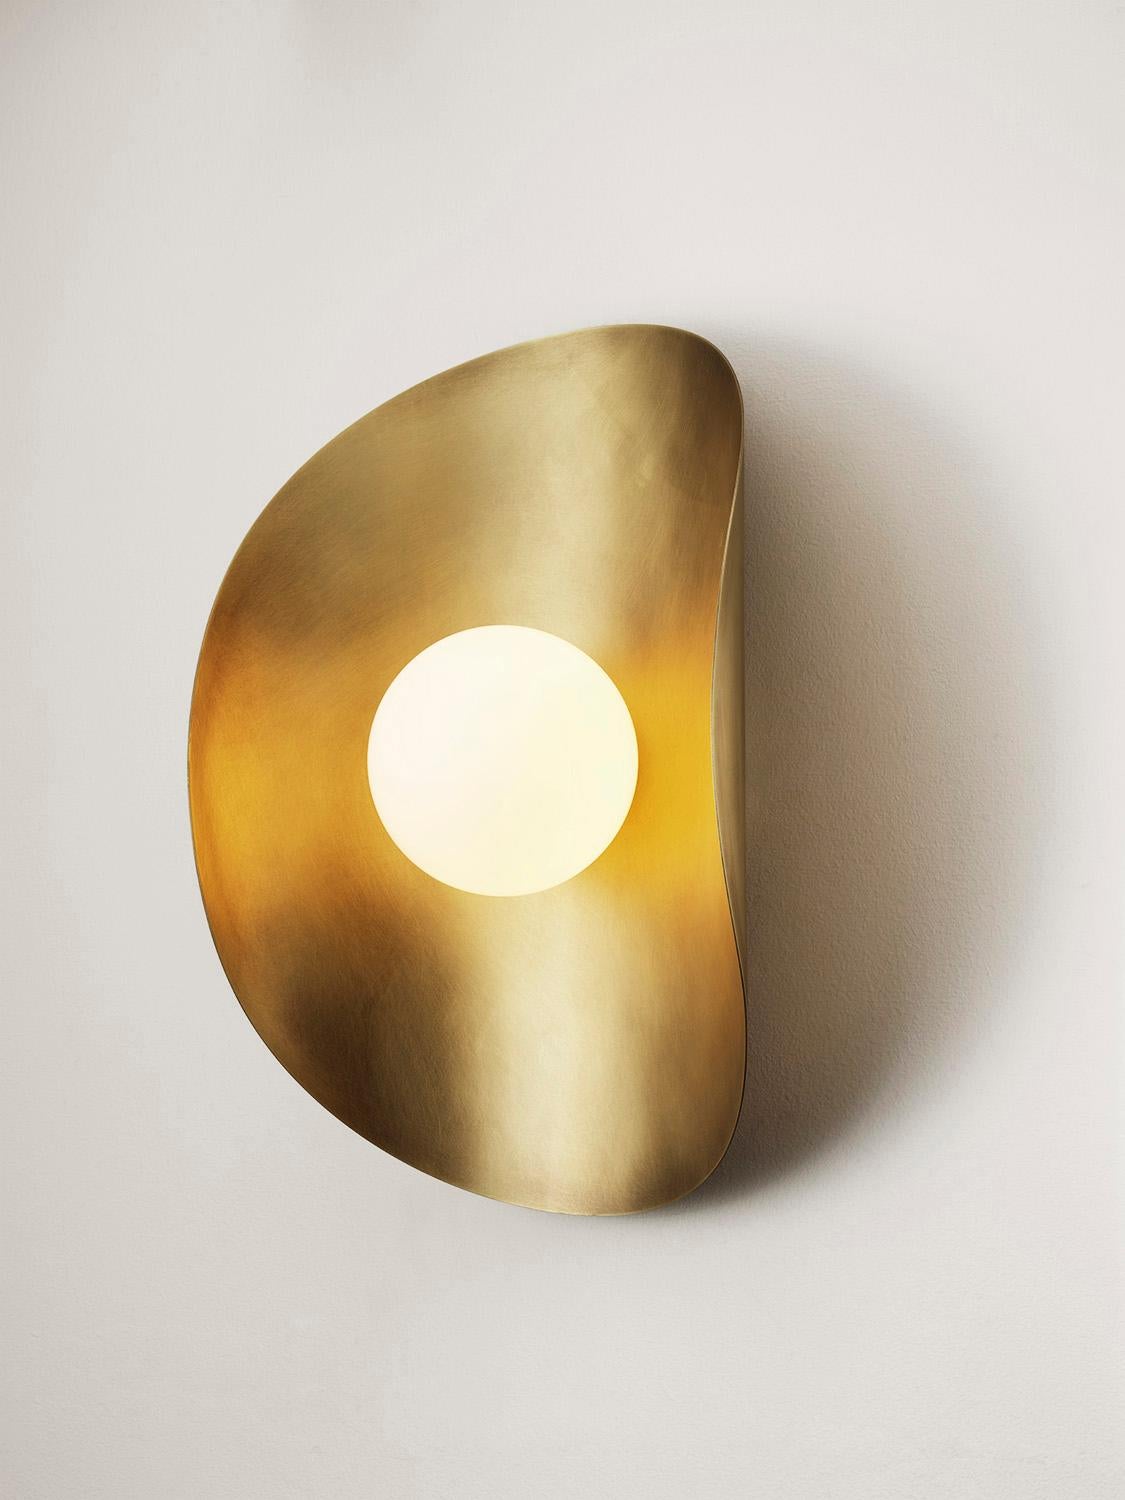 American MONTERA Wall Sconce or Flushmount , biomorphic Brass & Glass, Blueprint Lighting For Sale